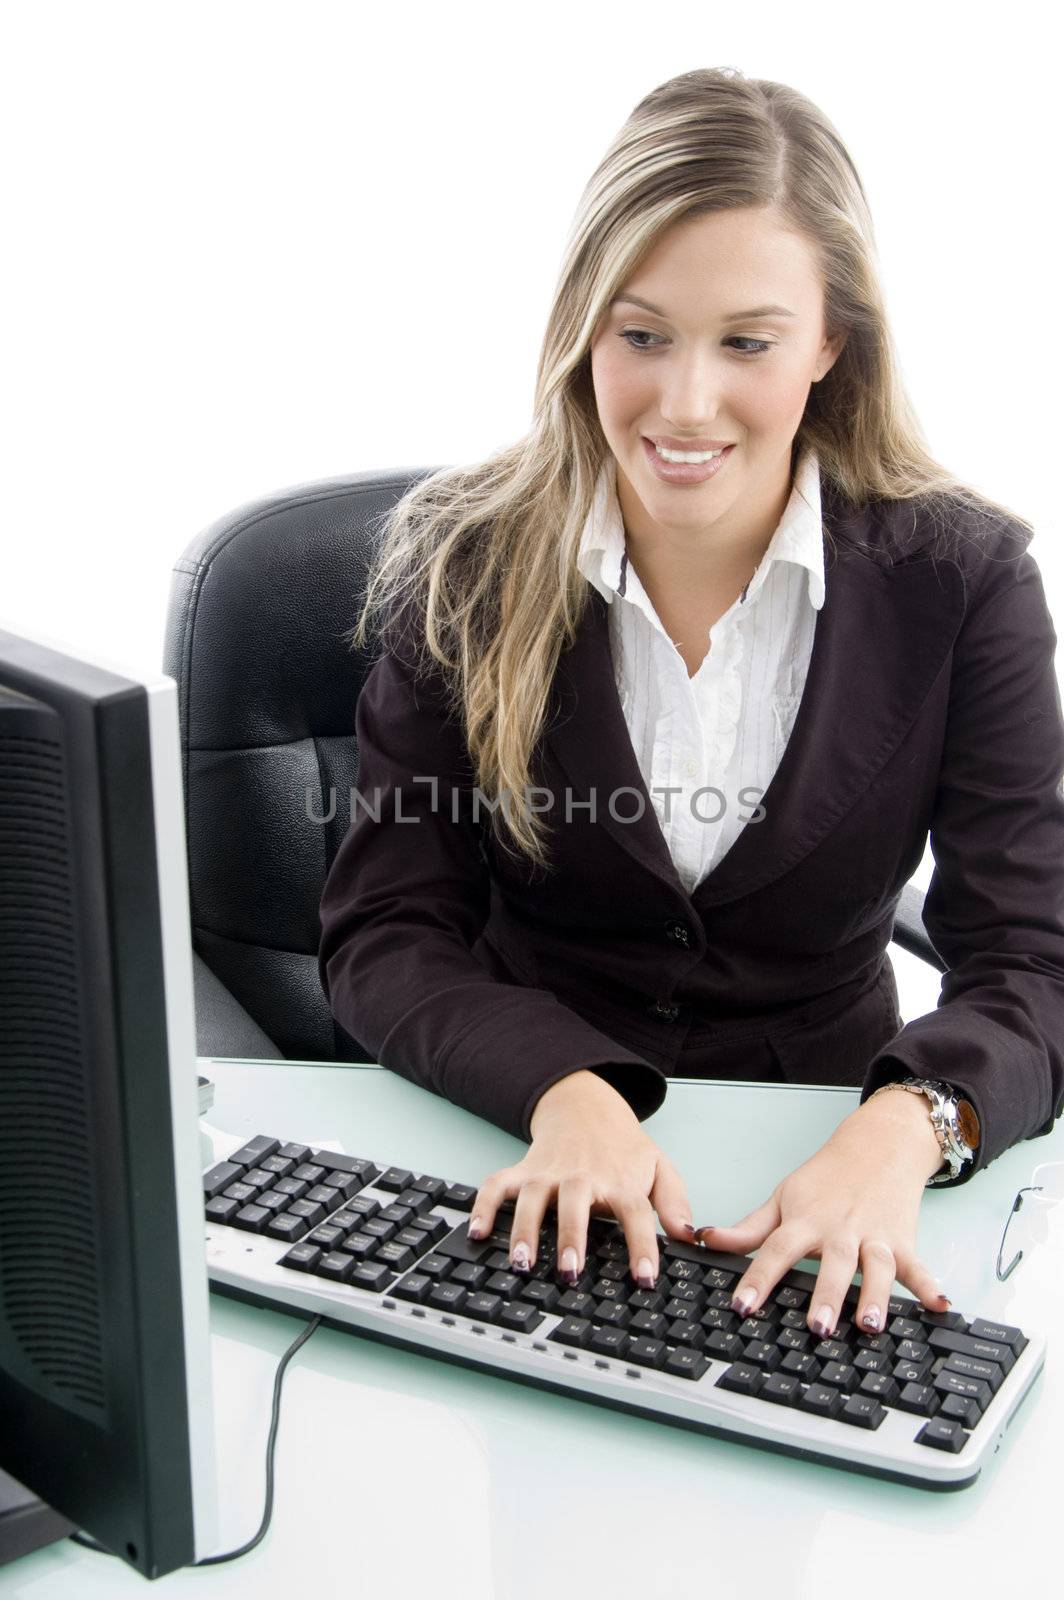 blonde woman working on computer by imagerymajestic